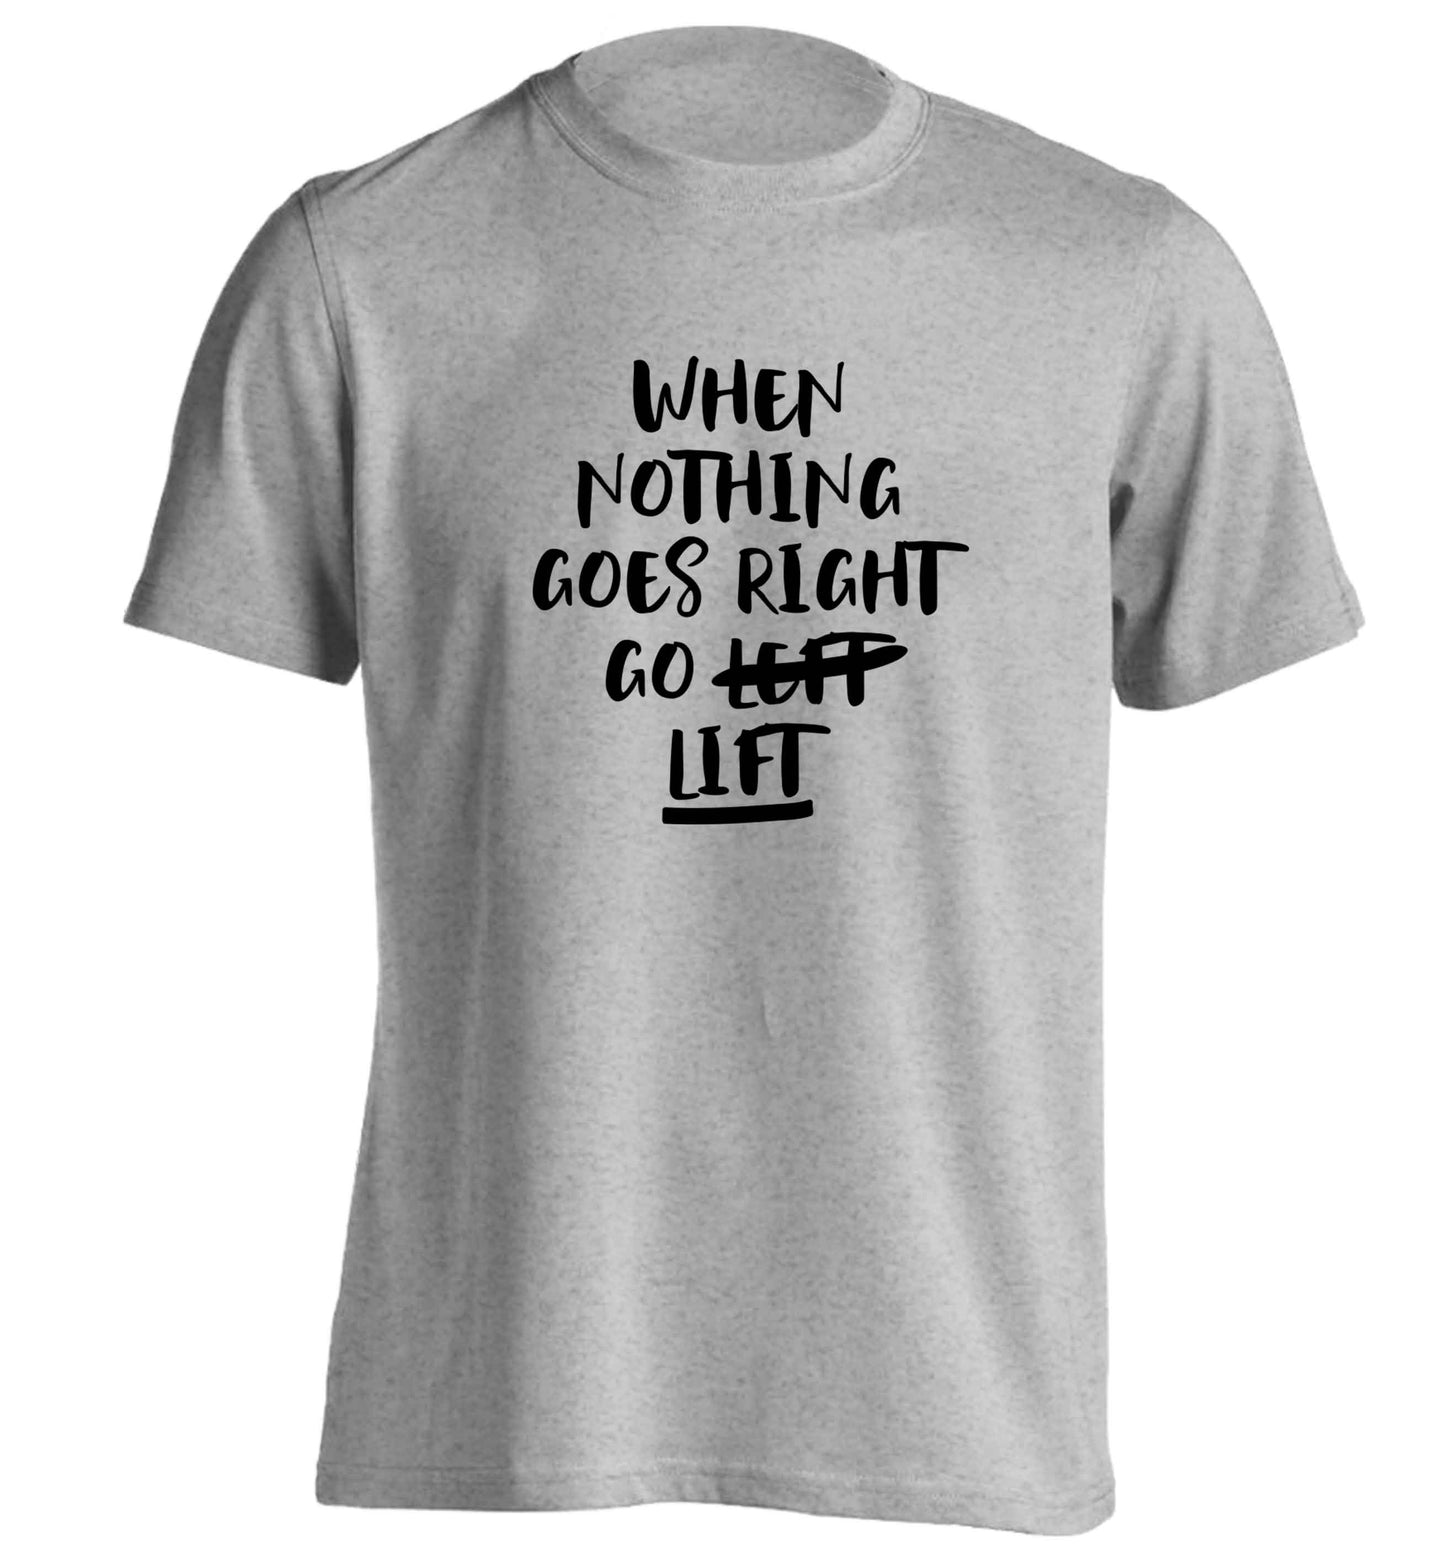 When nothing goes right go lift adults unisex grey Tshirt 2XL